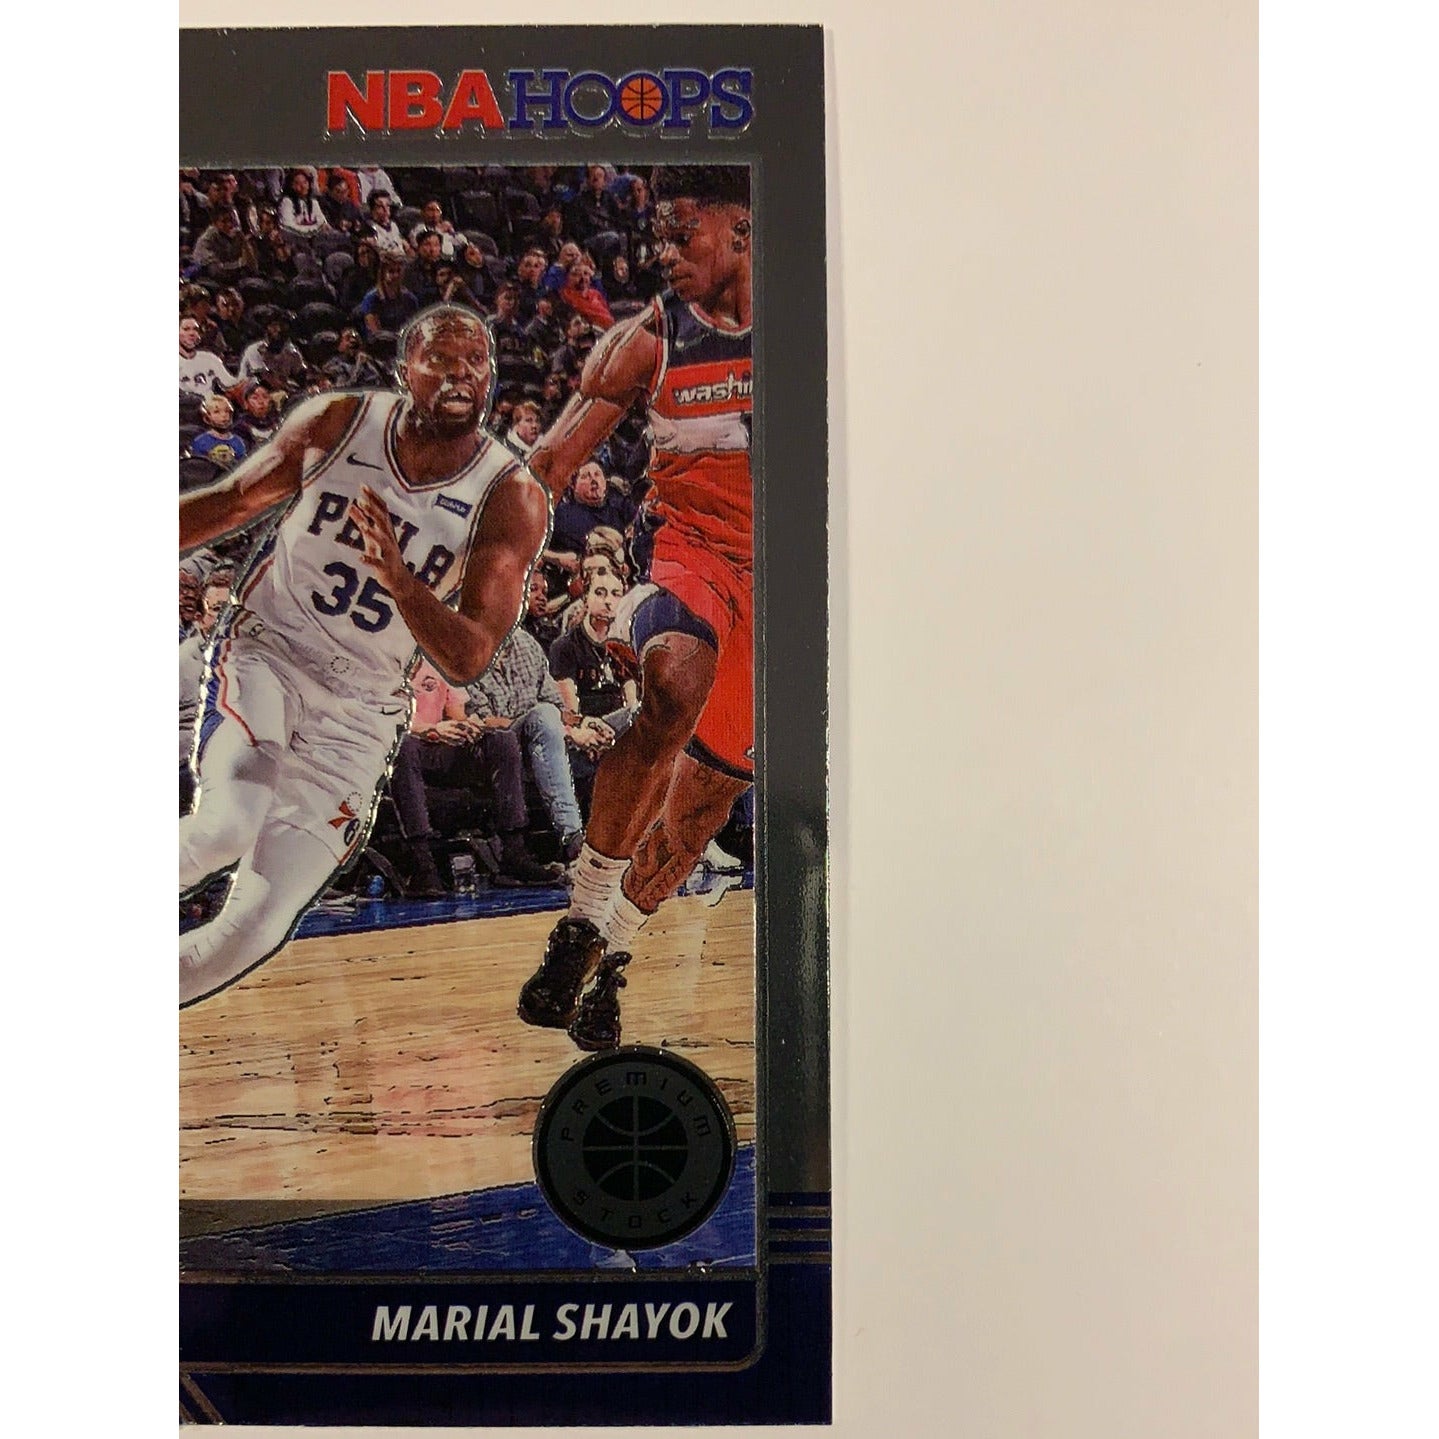  2019-20 Hoops Premium Stock Marial Shayok RC  Local Legends Cards & Collectibles